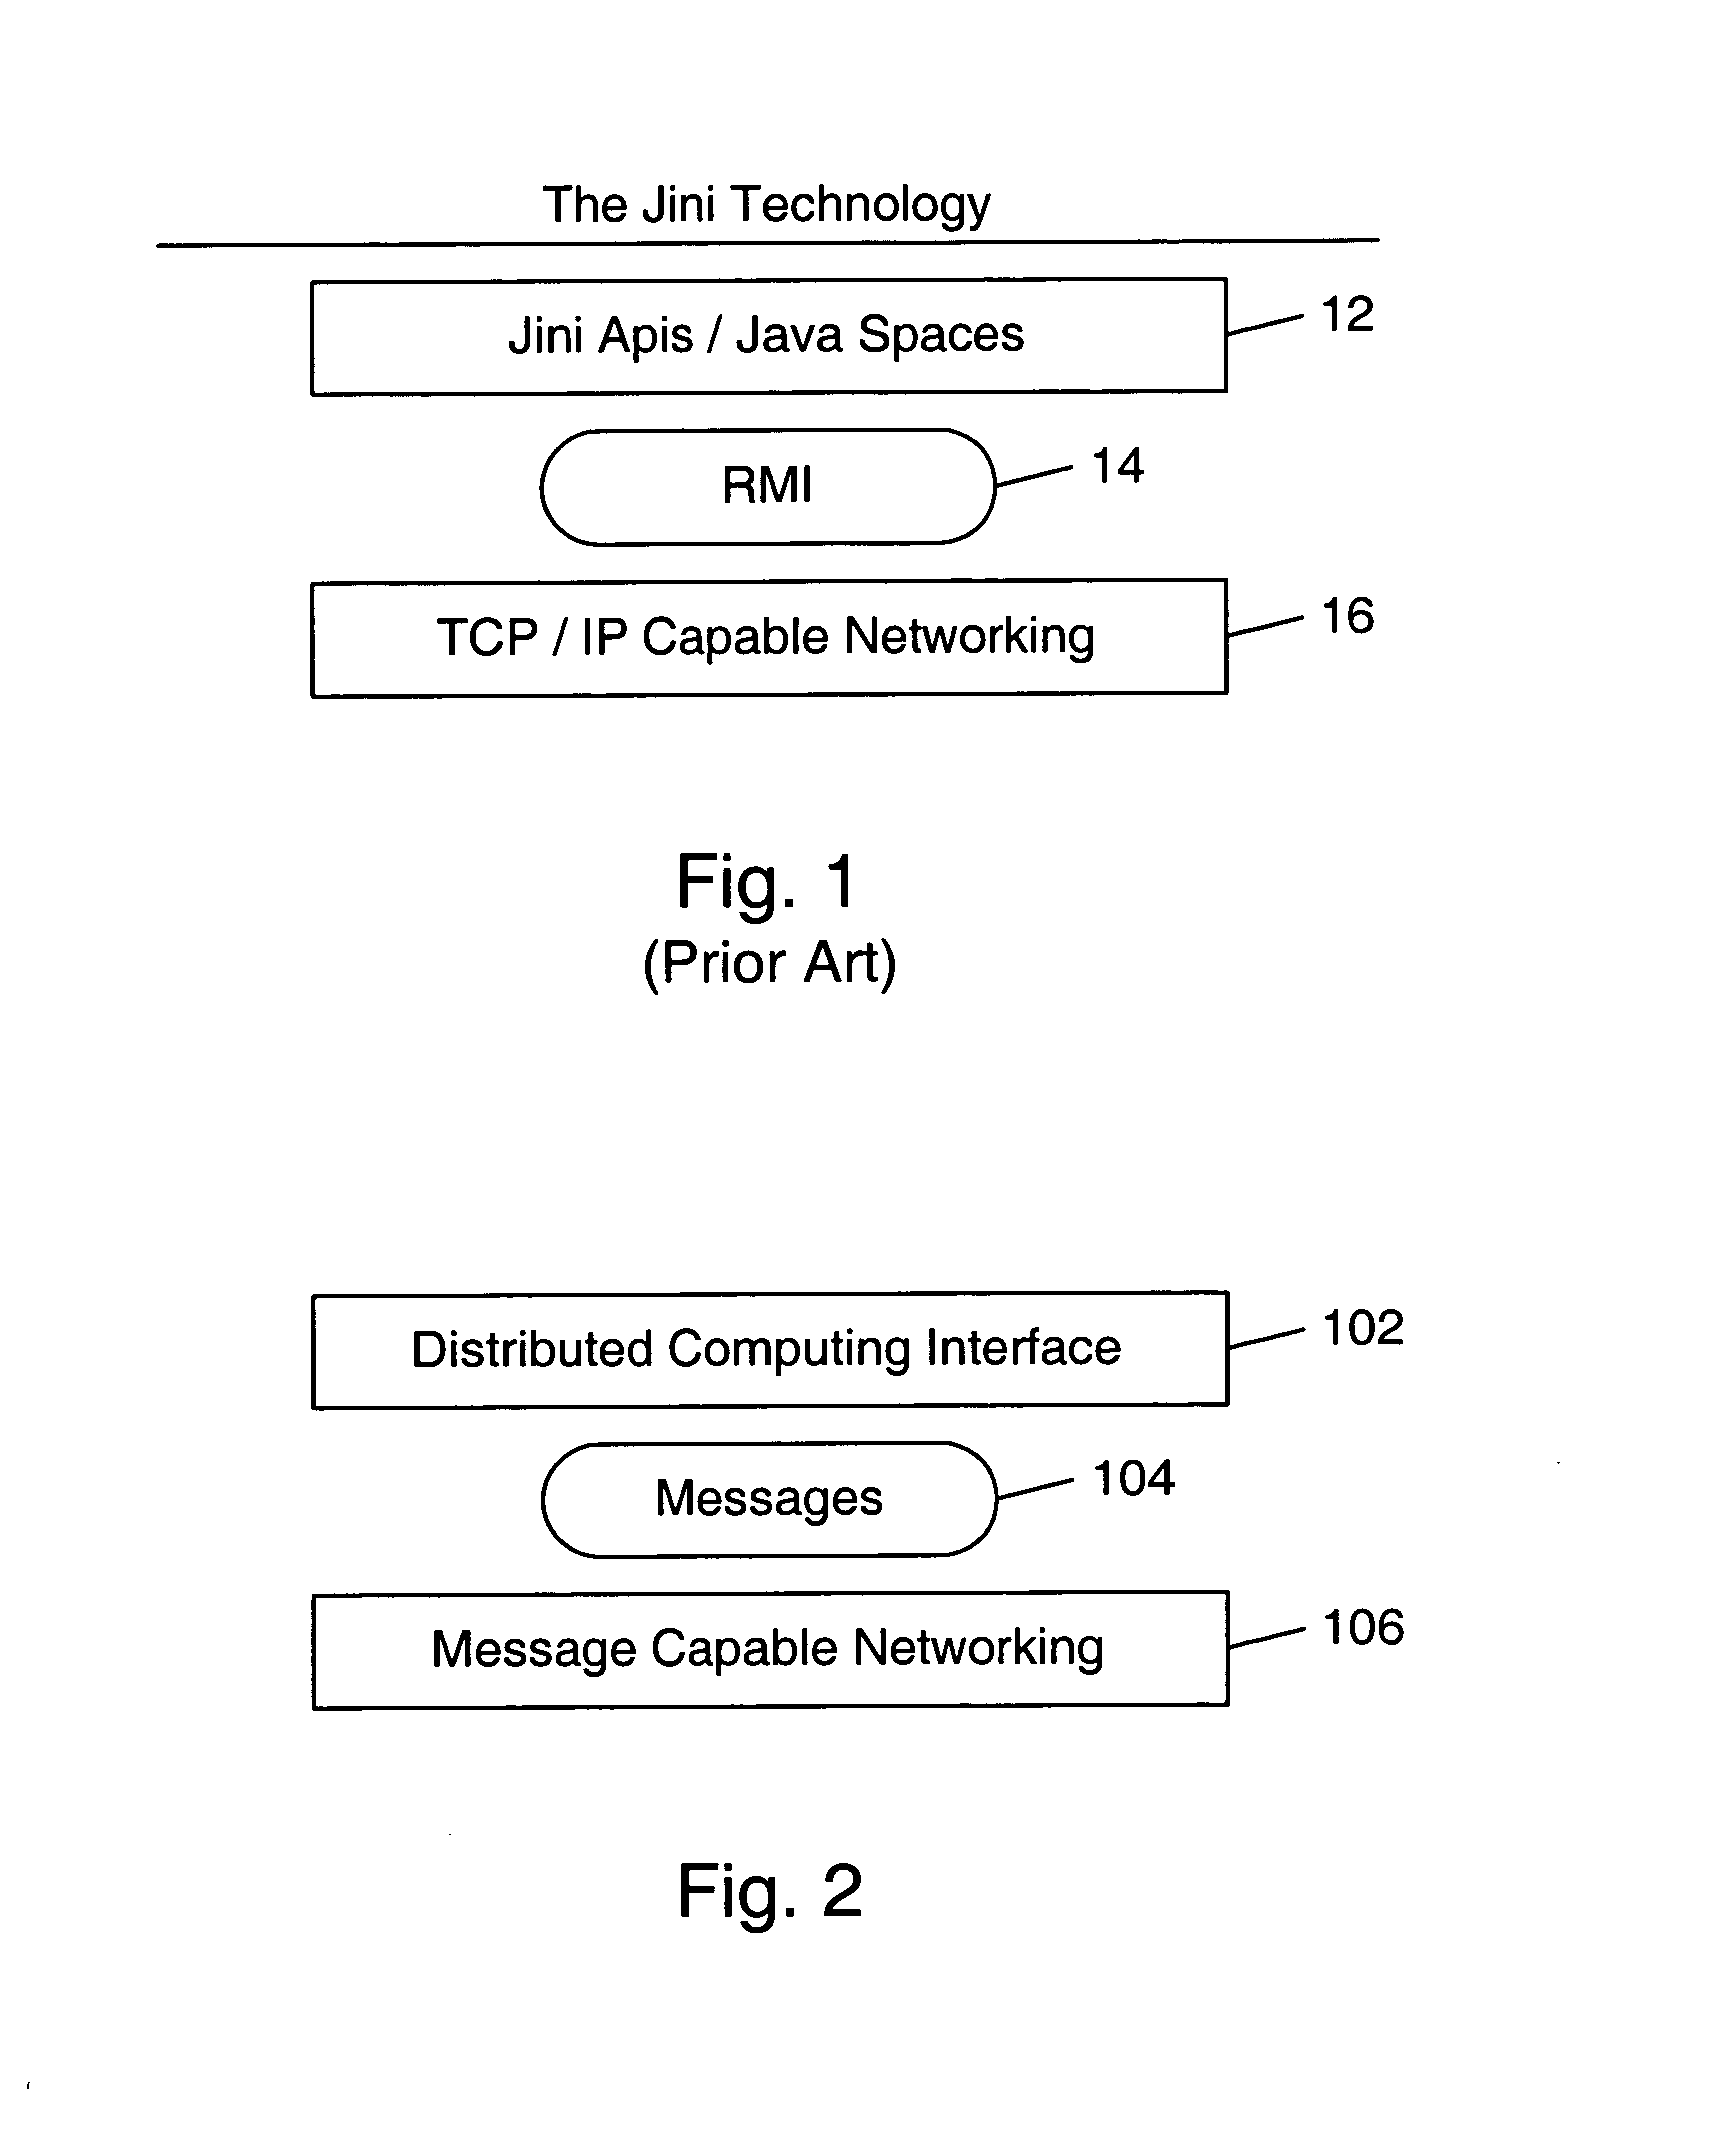 Automatic lease renewal with message gates in a distributed computing environment